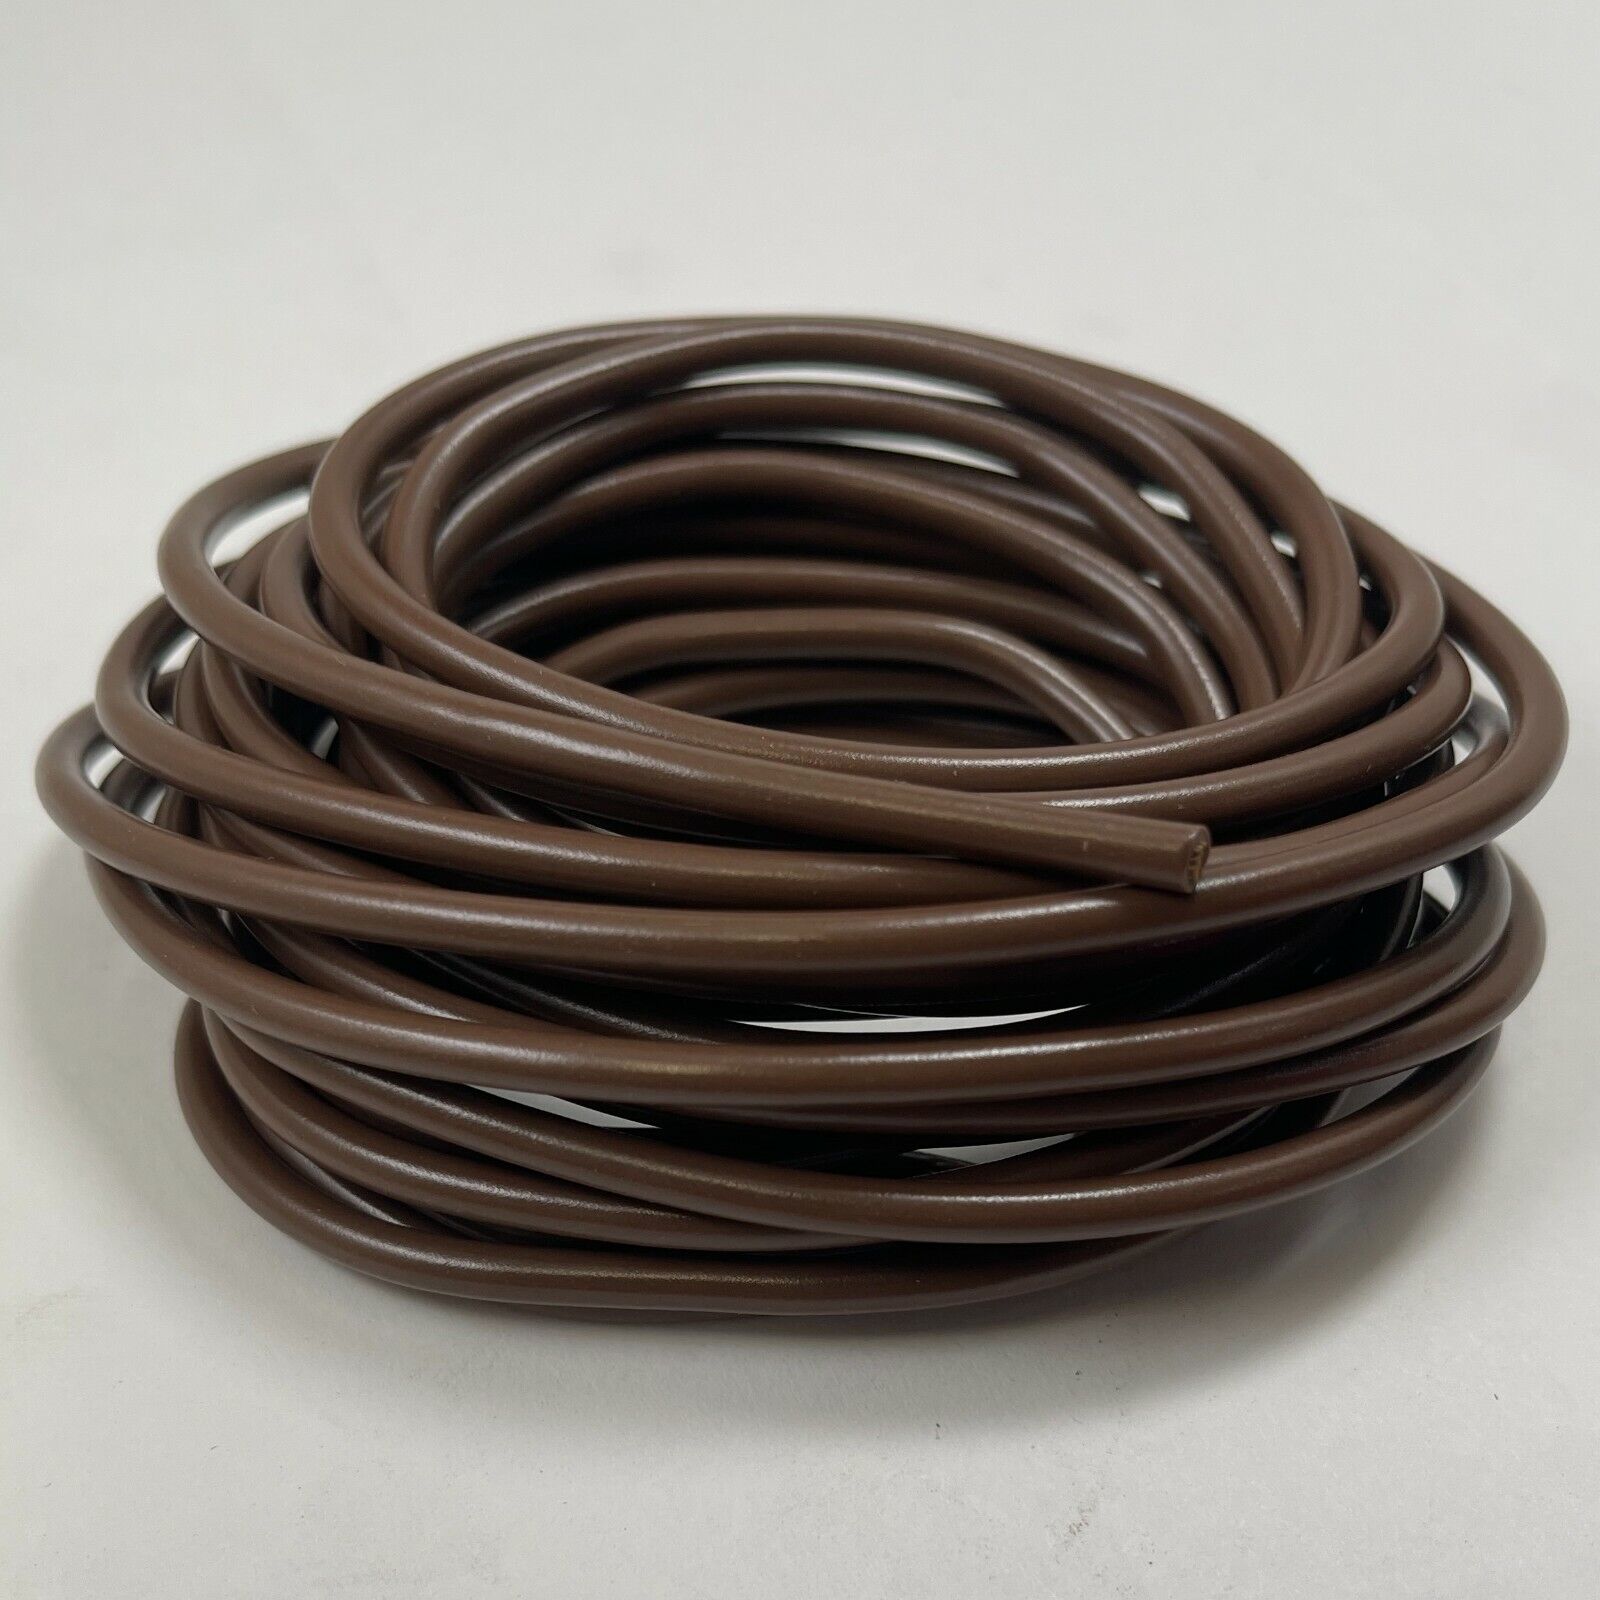 2 Pack of Automotive Primary Wire 16 Gauge 28 FT - Brown